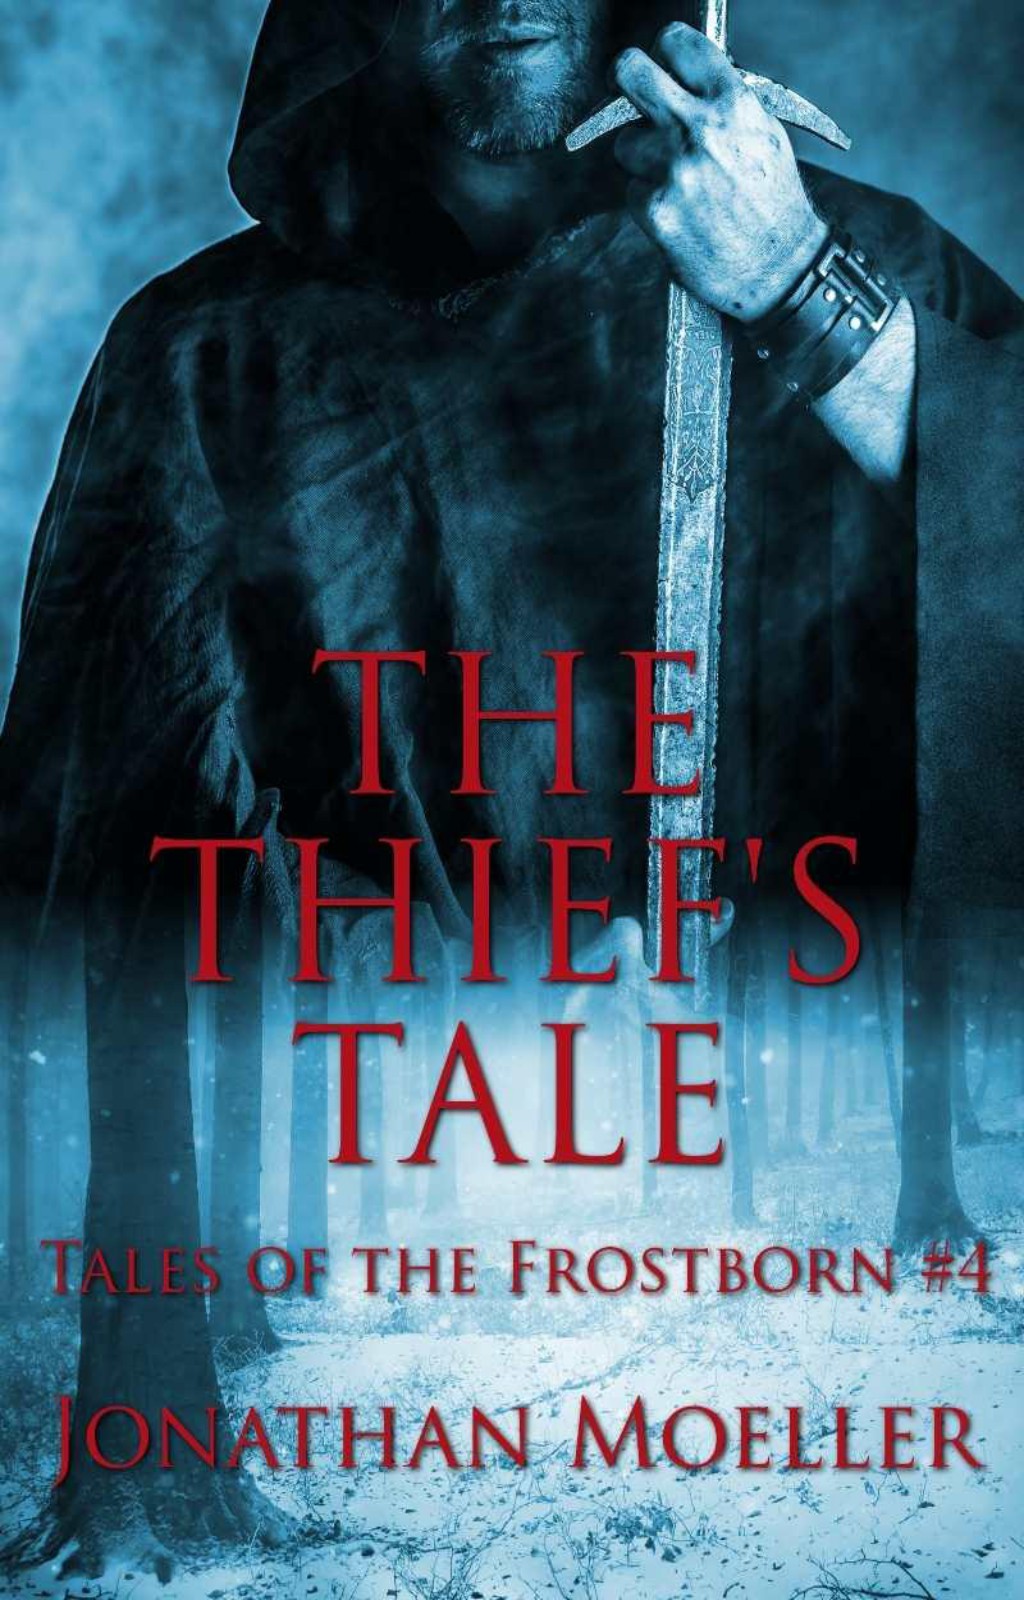 The Thief's Tale by Jonathan Moeller